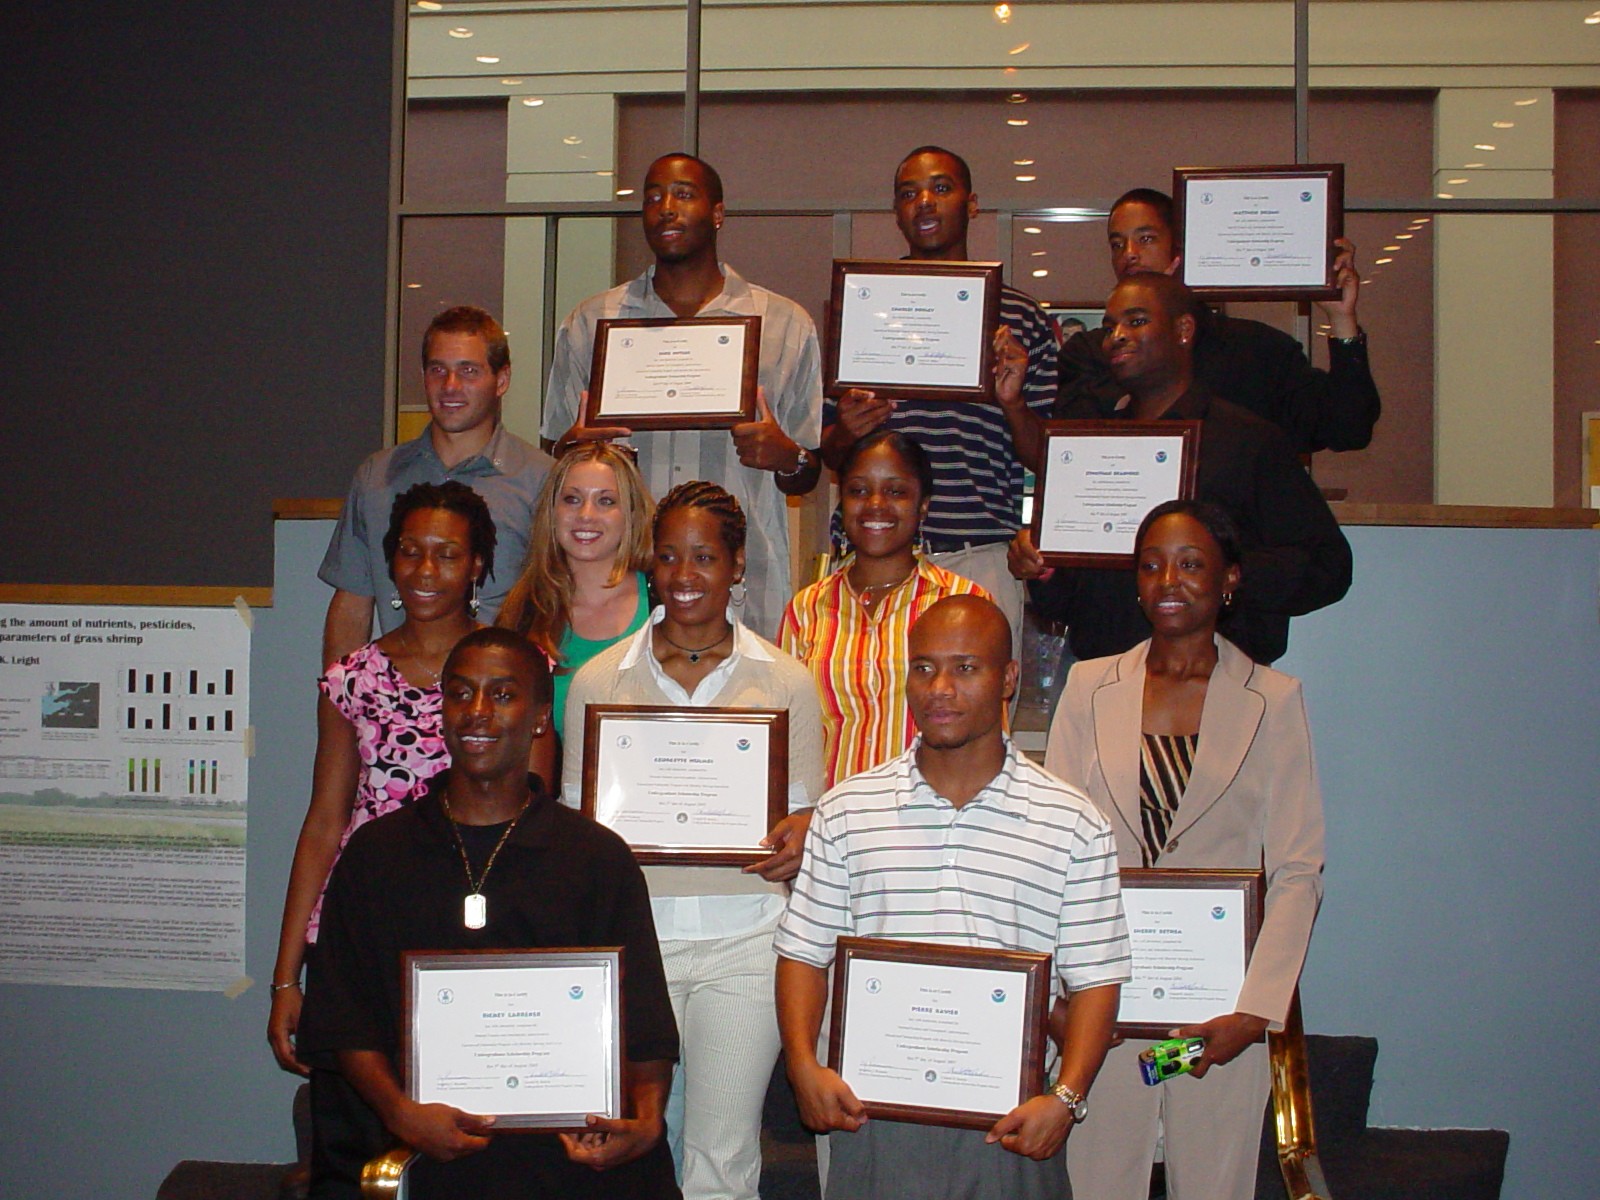 The class of 2004 undergraduate scholars poses with certificates of completion